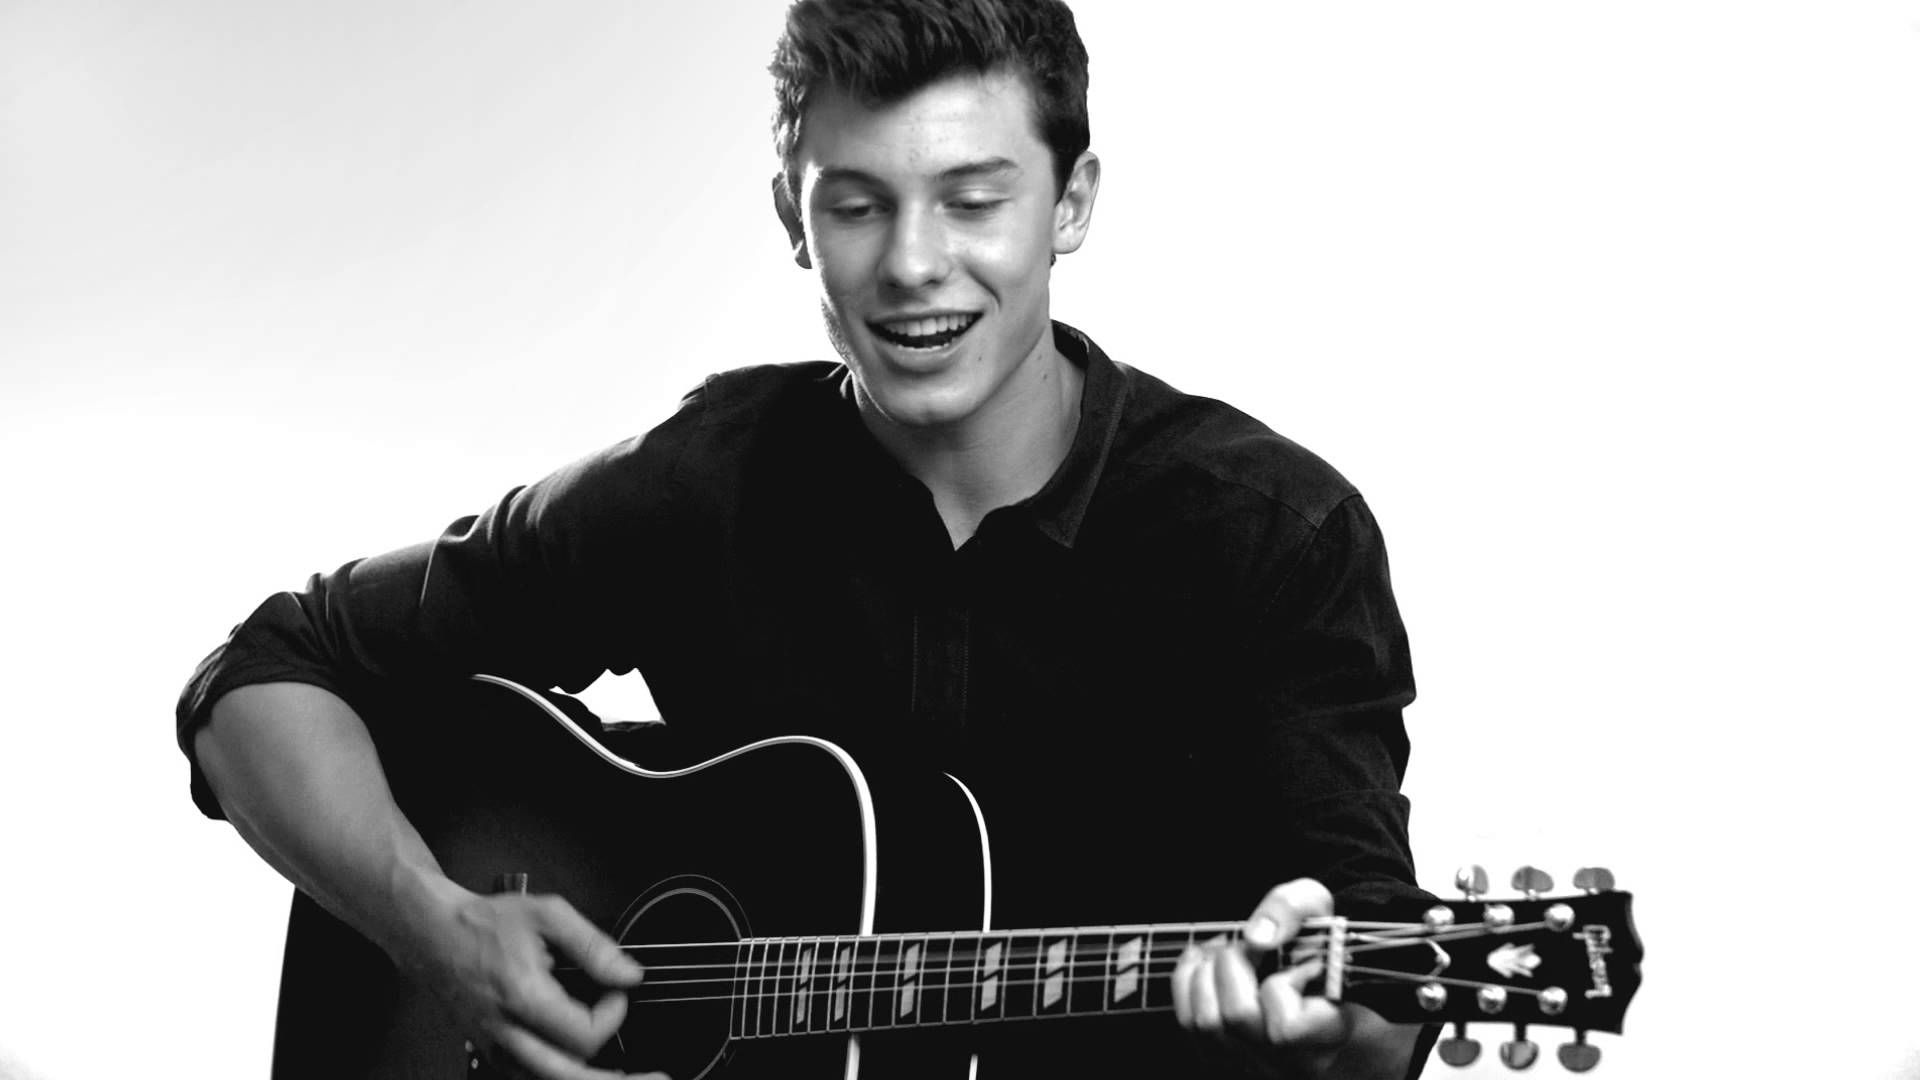 Shawn Mendes – “Drag Me Down” (One Direction Cover)